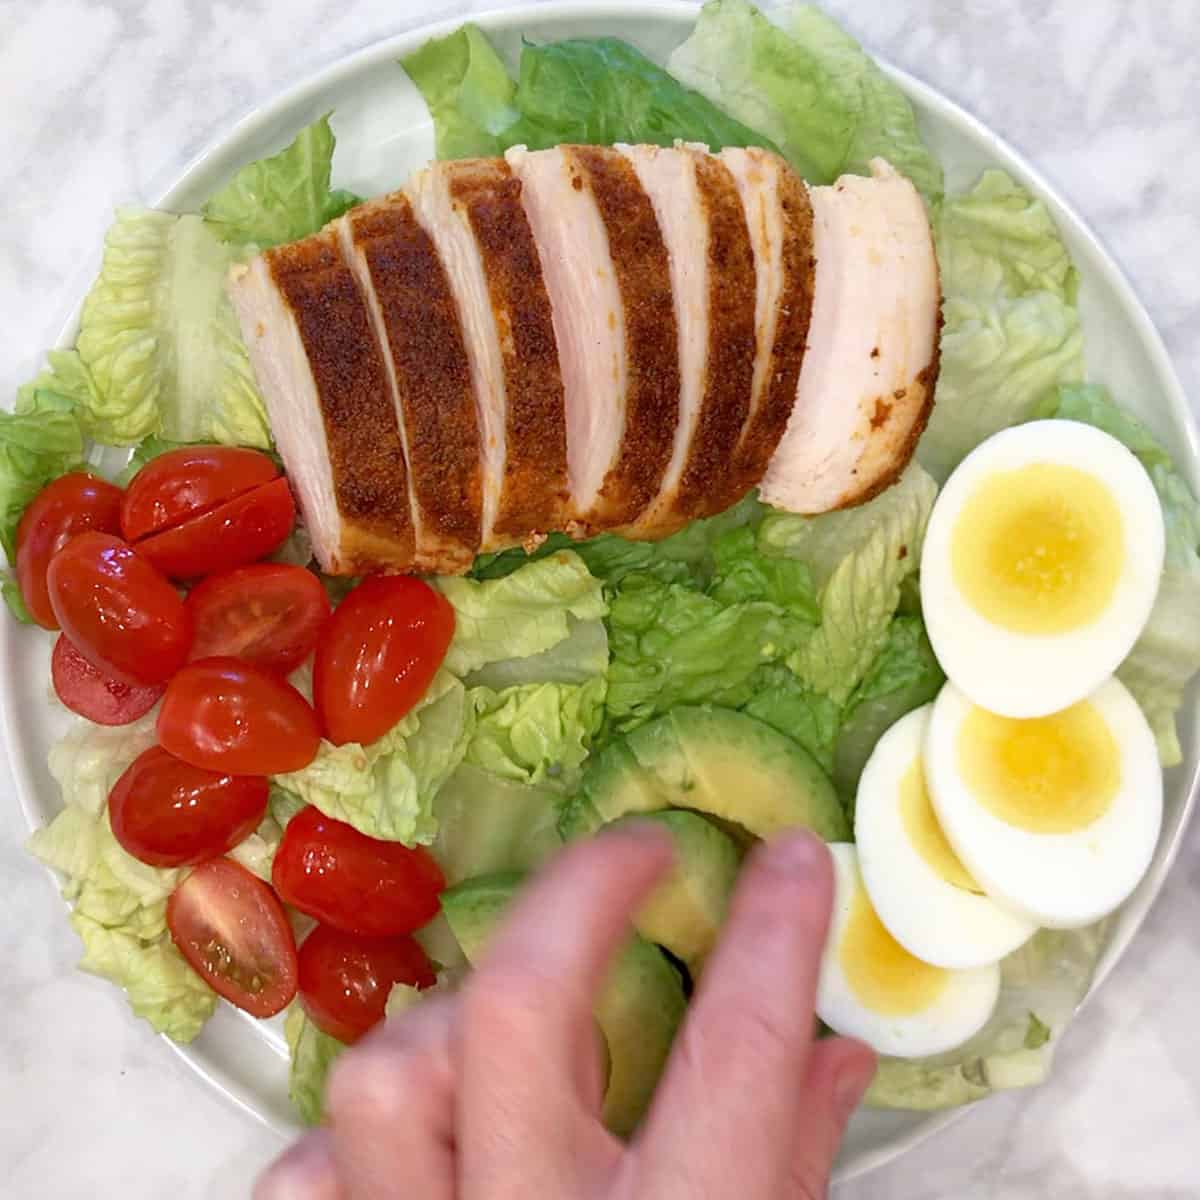 Adding hard-boiled eggs to the salad.